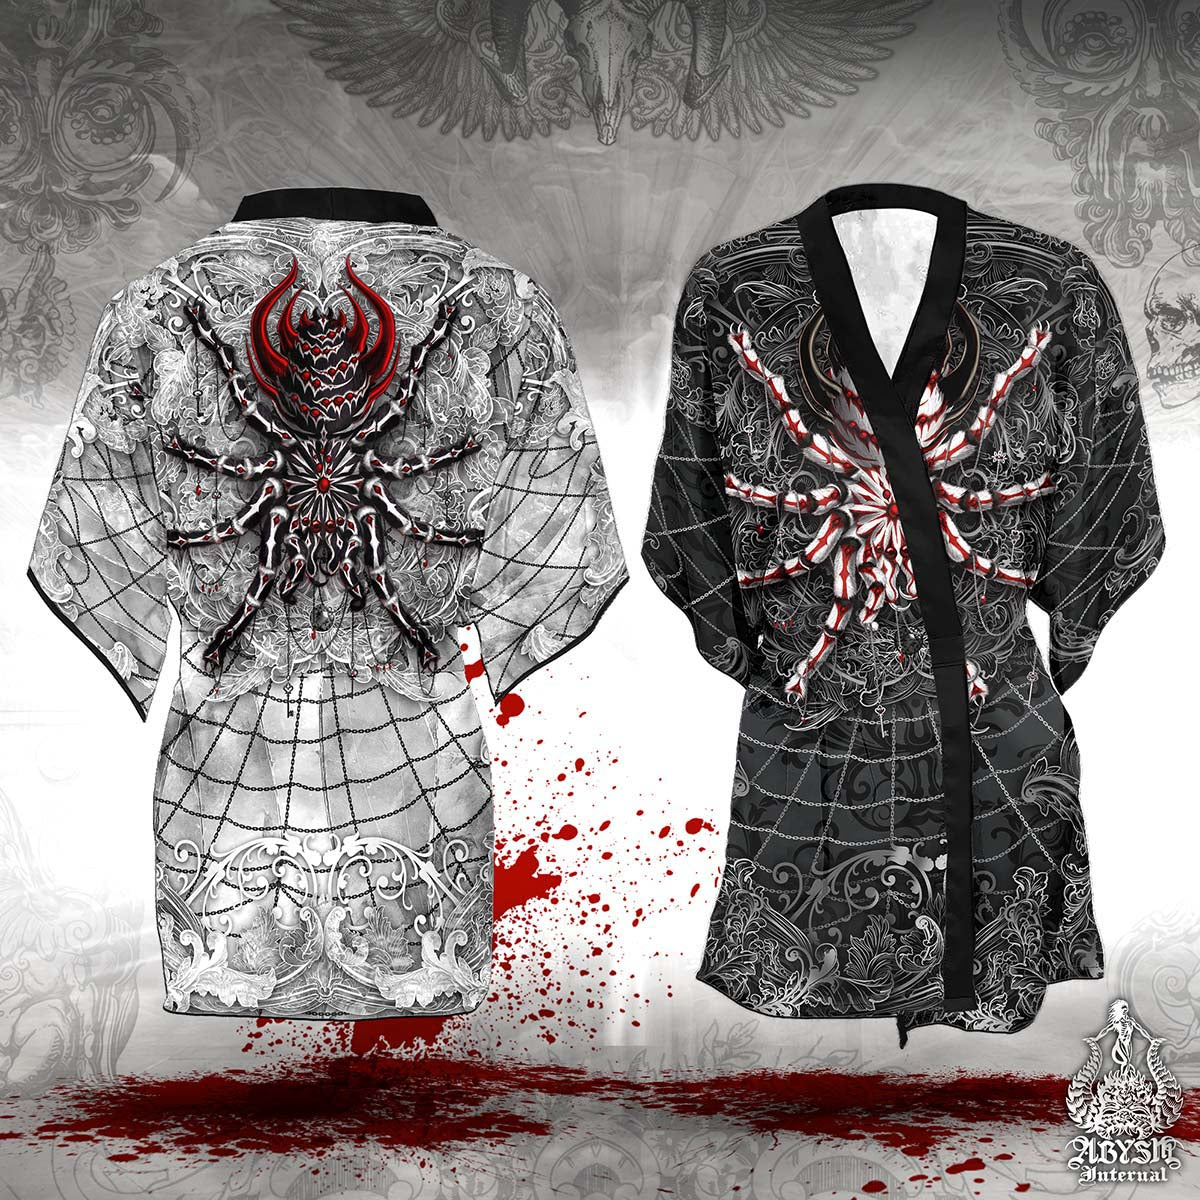 Gothic Kimonos, Short Robes - Art Prints, Unique Indie Clothing and Gifts, Halloween Spiders - Abysm Internal